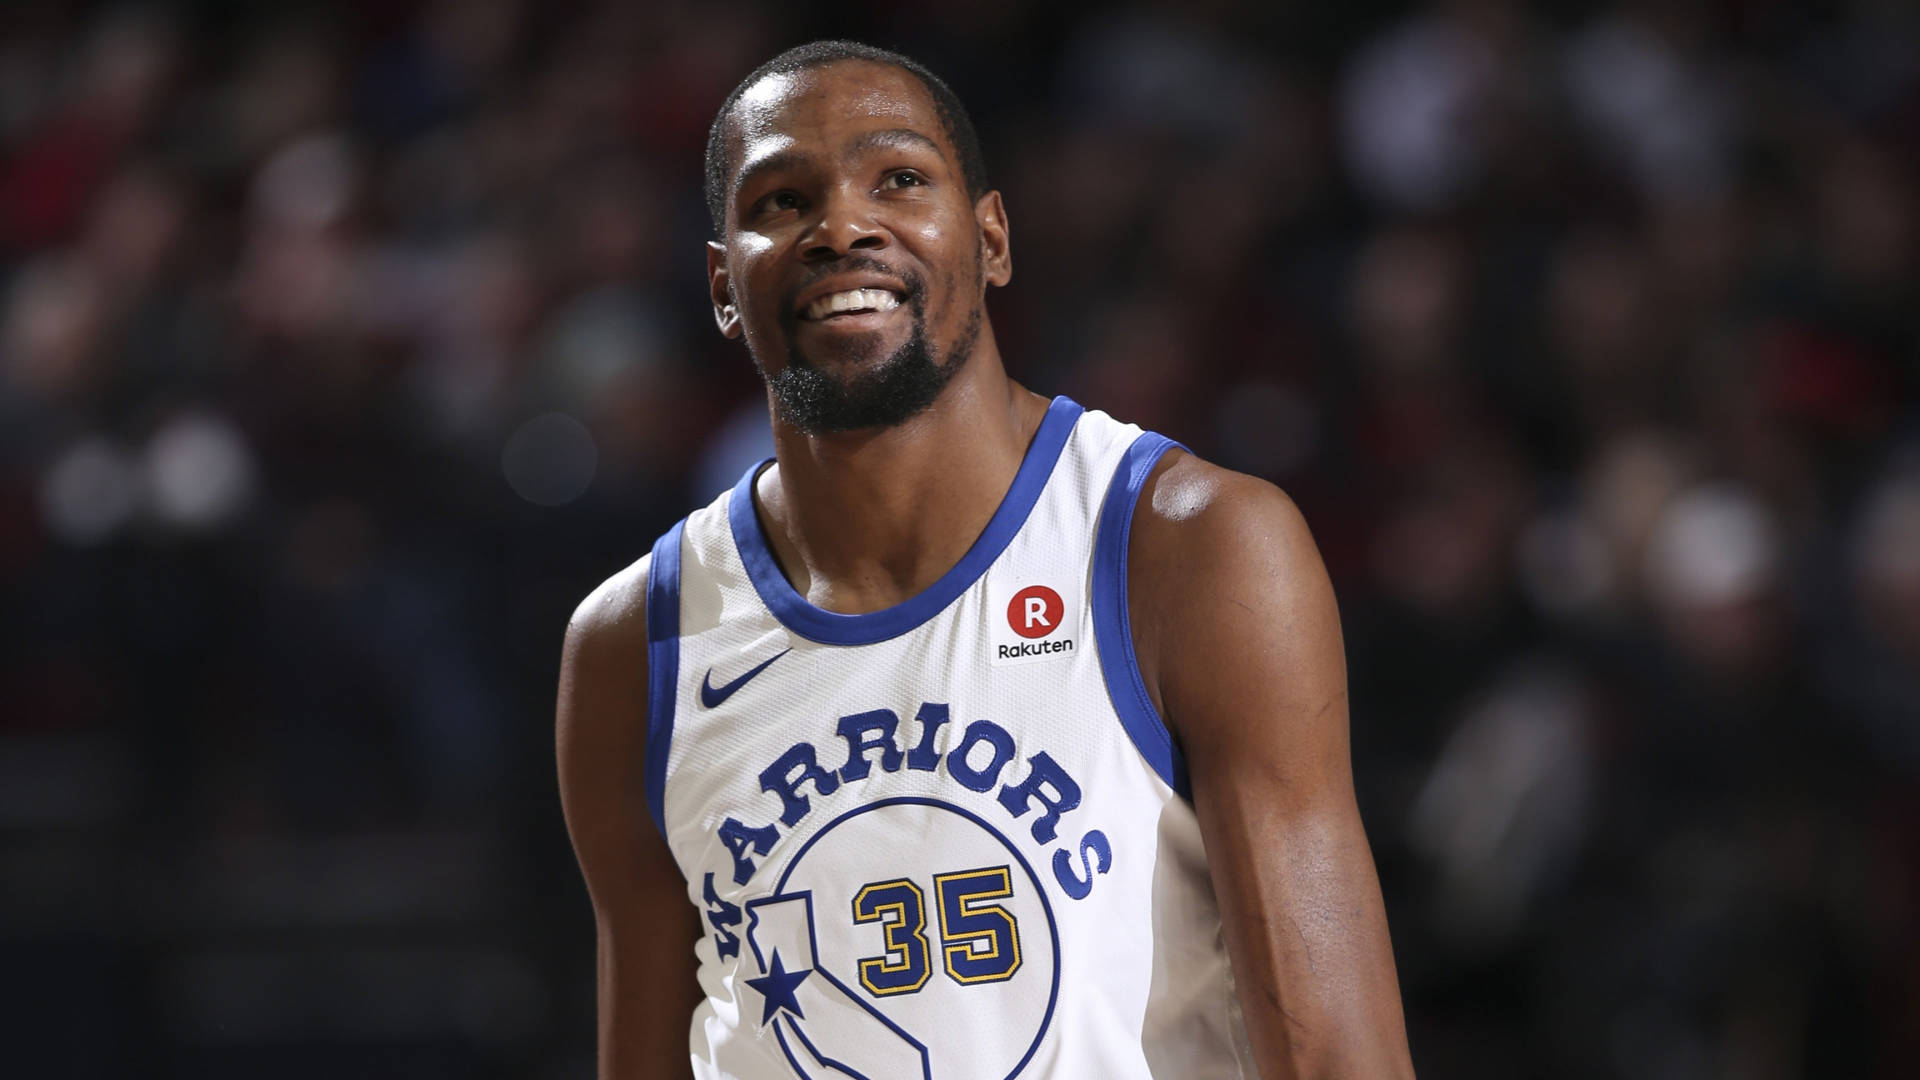 Kevin Durant Smiling In Game Background